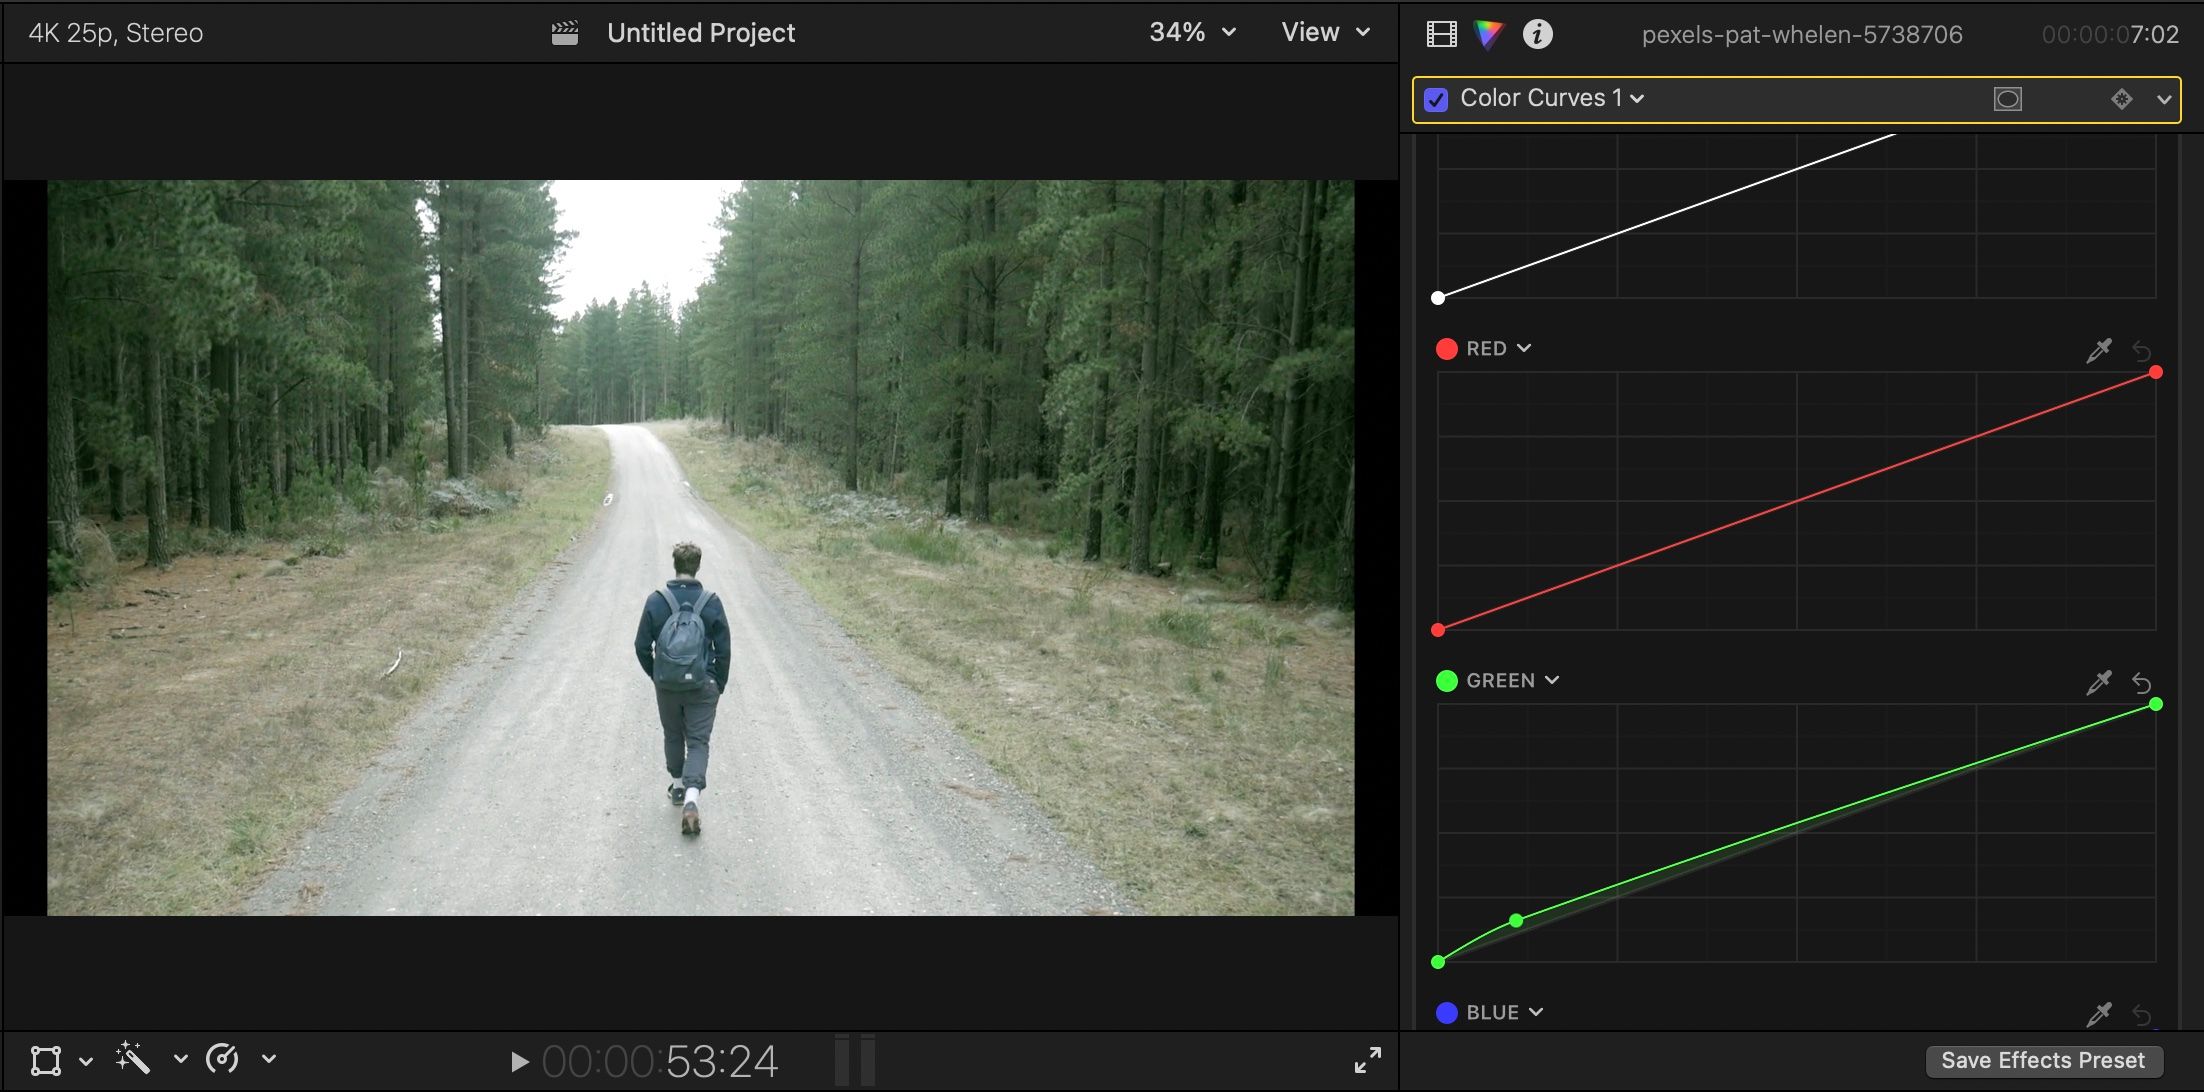 Screenshot of color curves features in Final Cut Pro adjusted to show more green